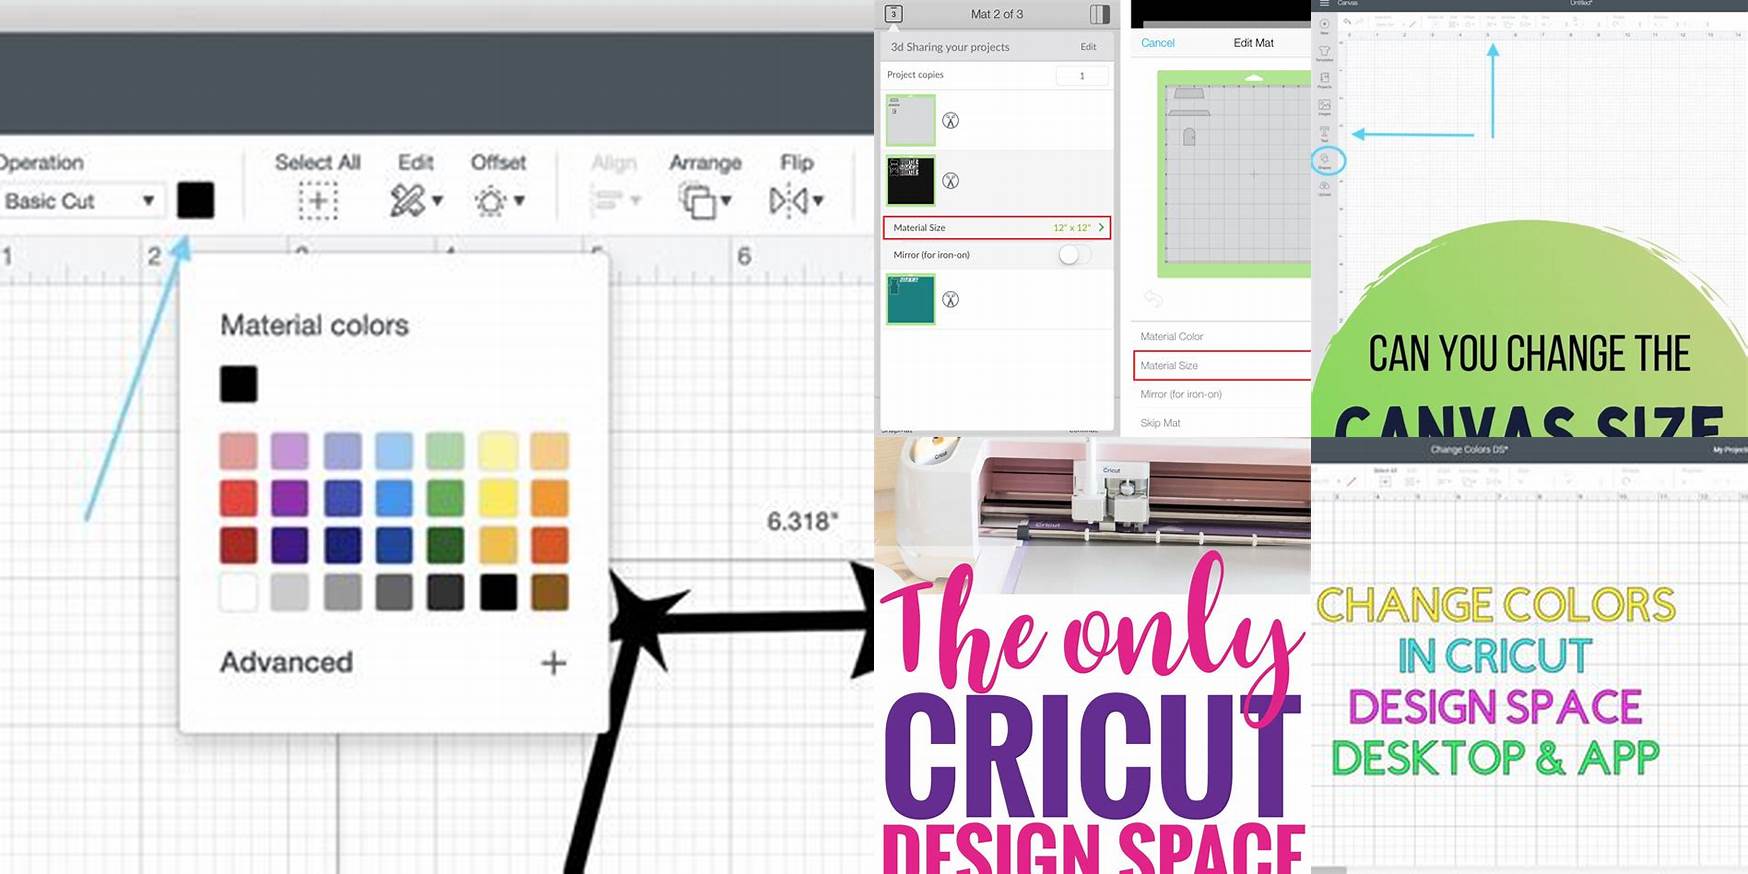 How To Change Canvas Size In Cricut Design Space